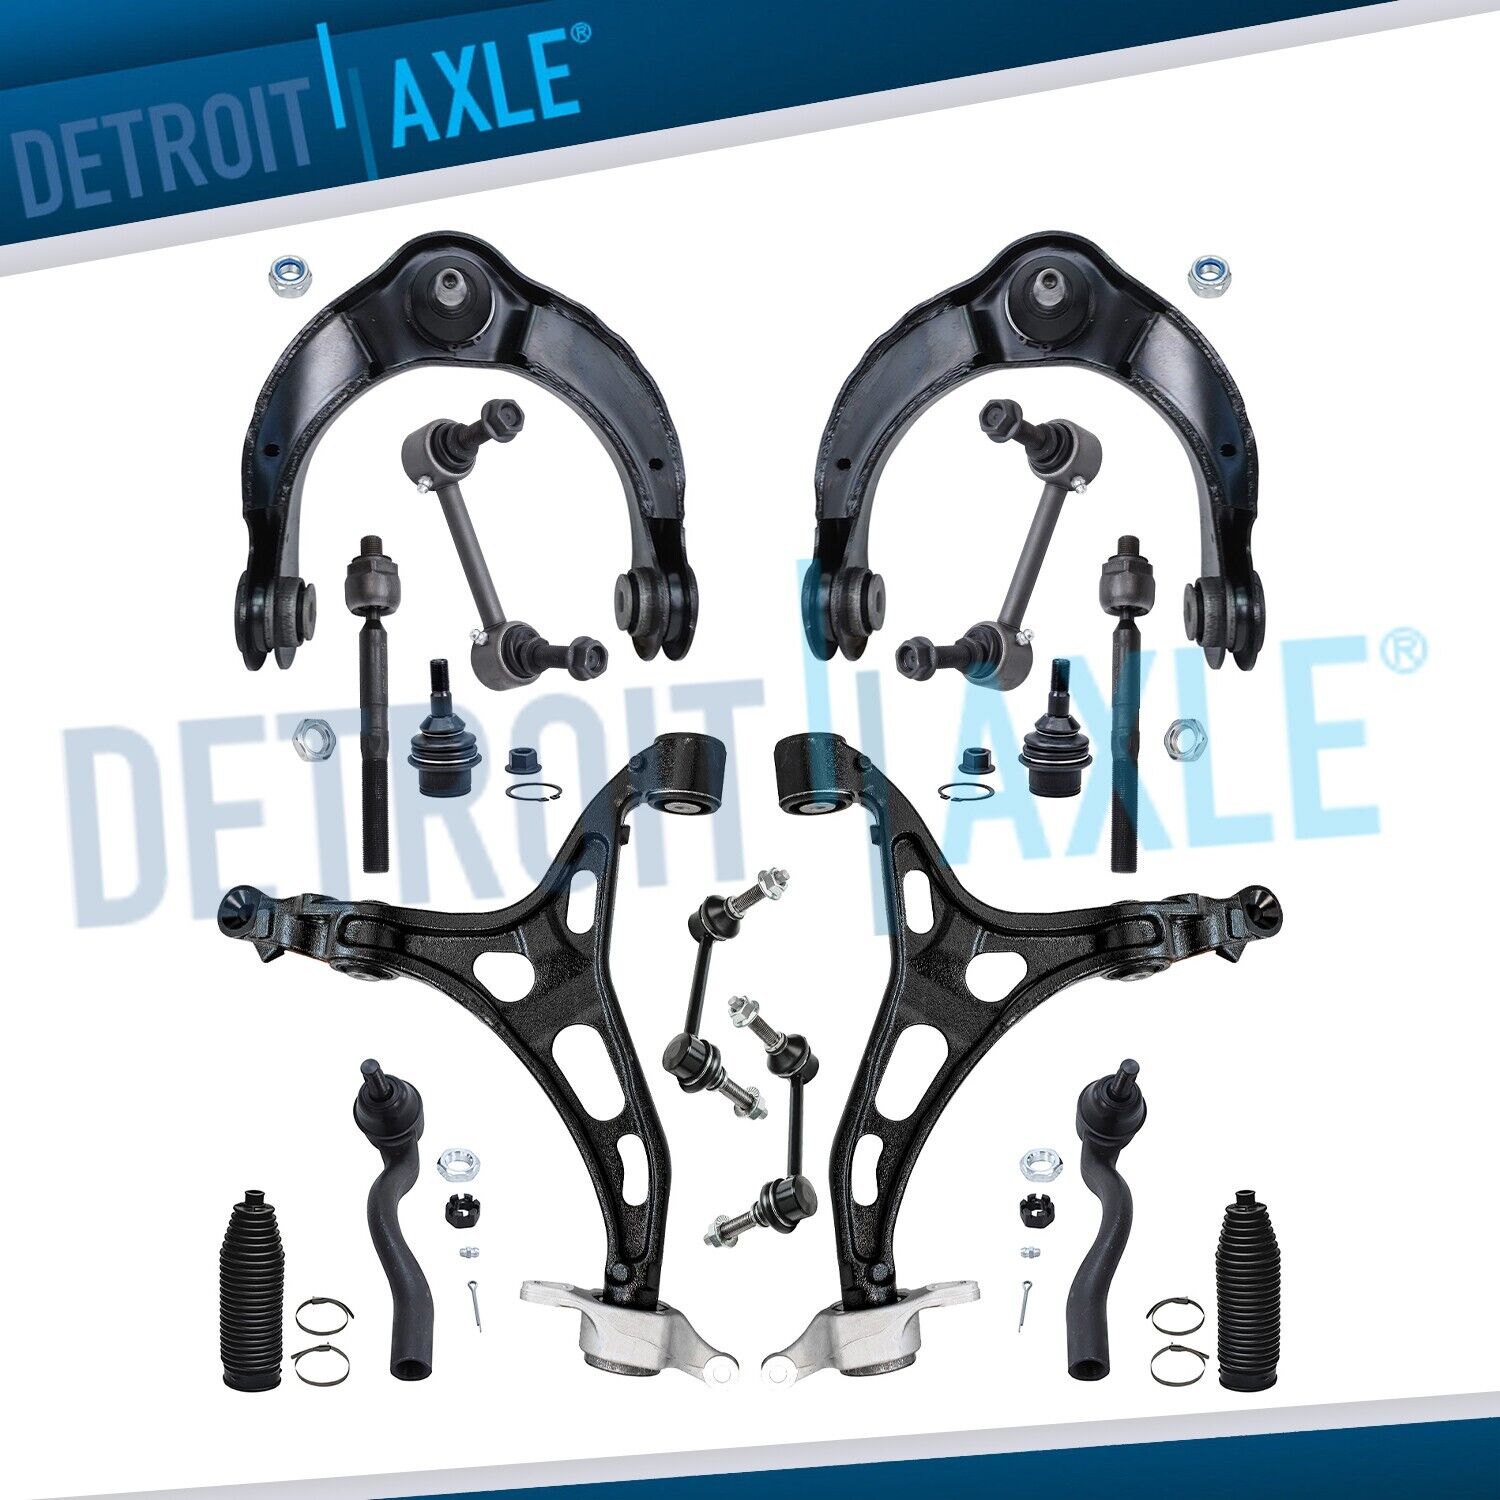 16pc Front Upper Lower Control Arms for 2011-2015 Dodge Durango Grand Cherokee